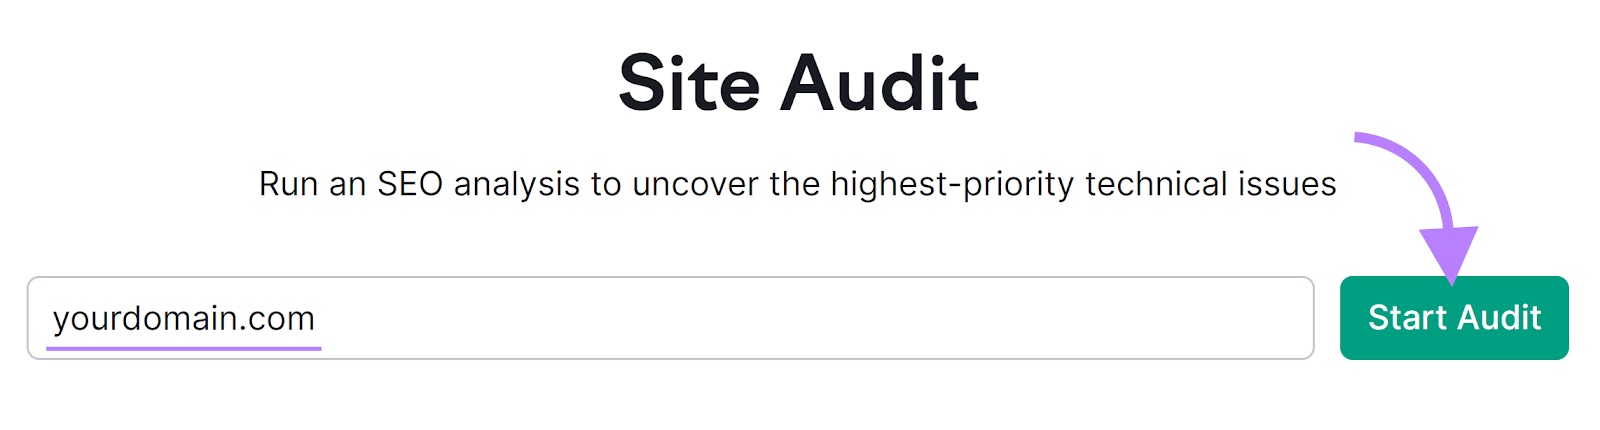 Site Audit tool with "yourdomain.com" in the search field and an arrow pointing to the "Start audit" button.